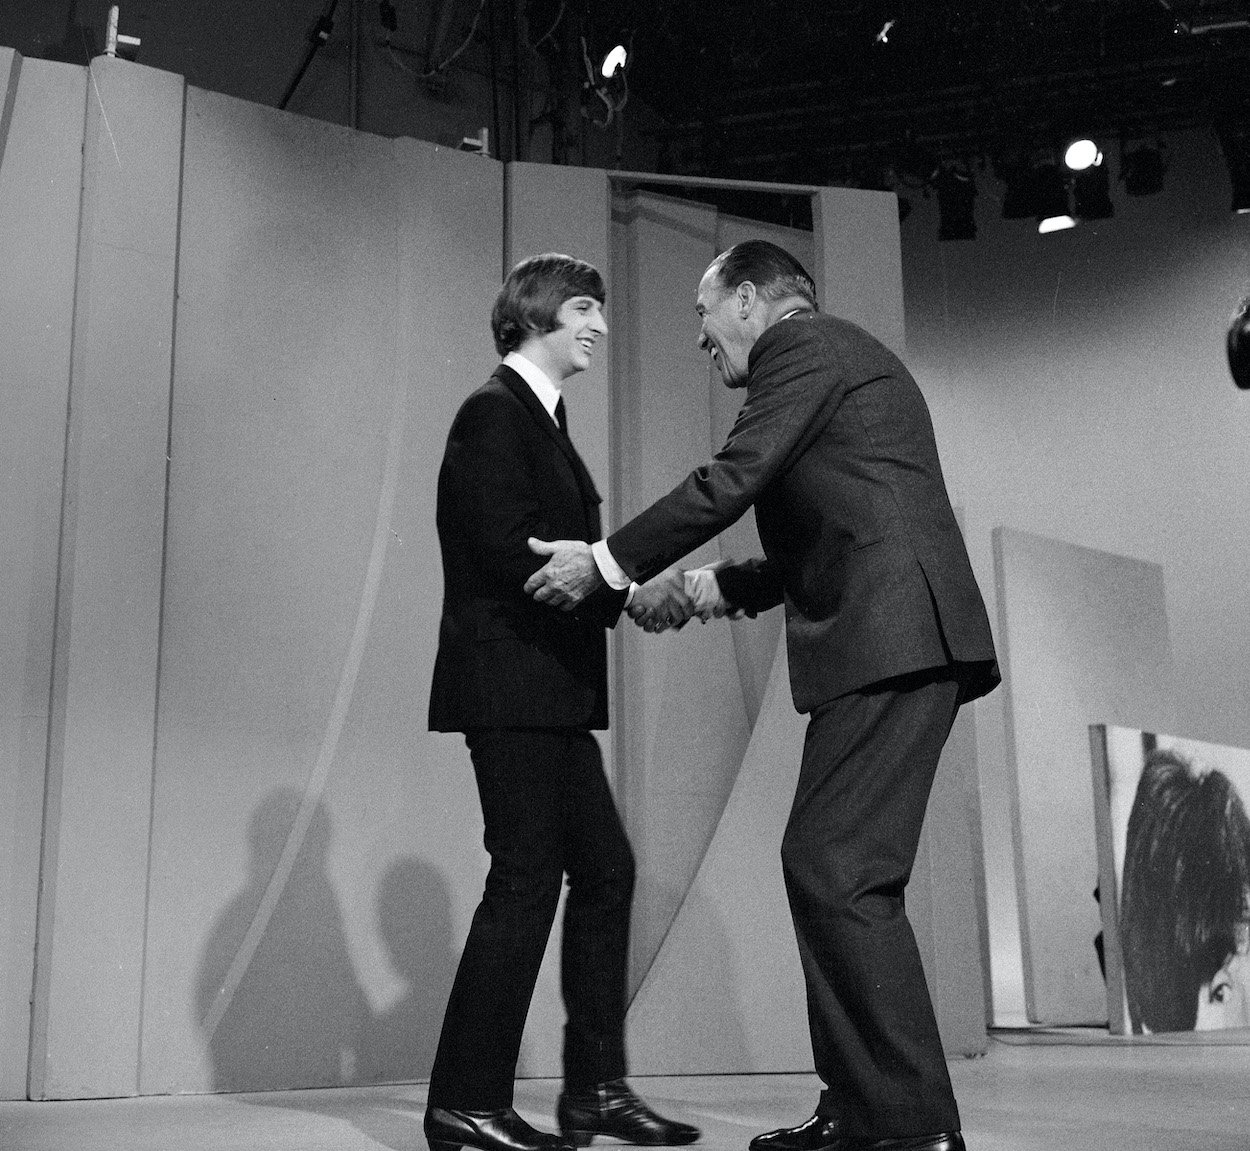 Ringo Starr (left) shakes hands with Ed Sullivan in 1965. Ringo said a chance encounter with Sullivan led to them being booked for his show, which led to international superstardom.